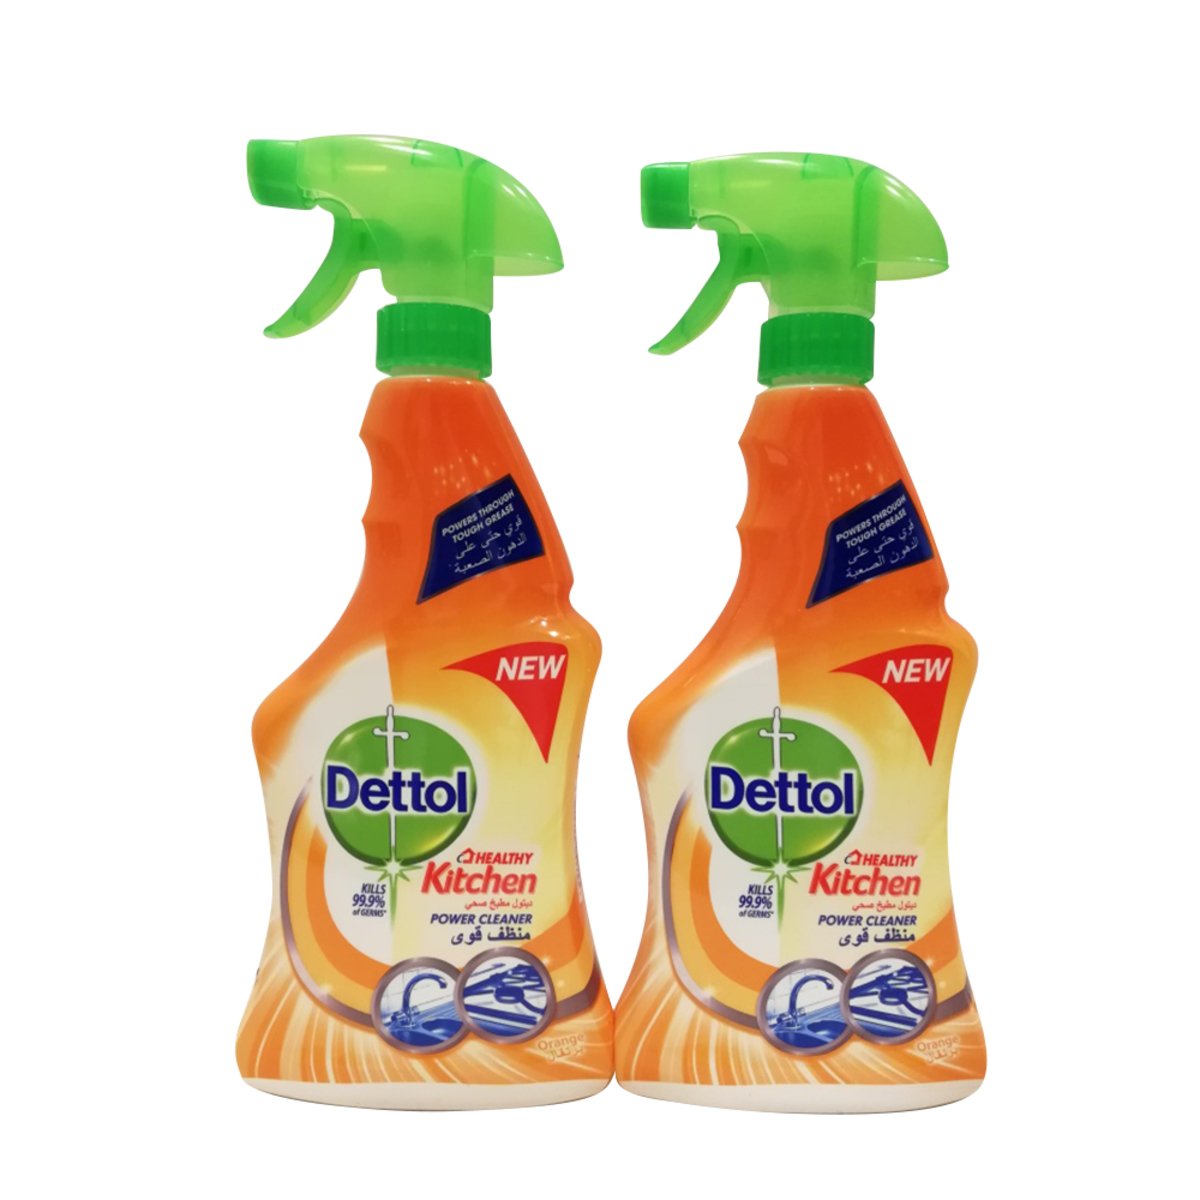 Dettol Anti Bacterial Kitchen Cleaner 2 x 500ml